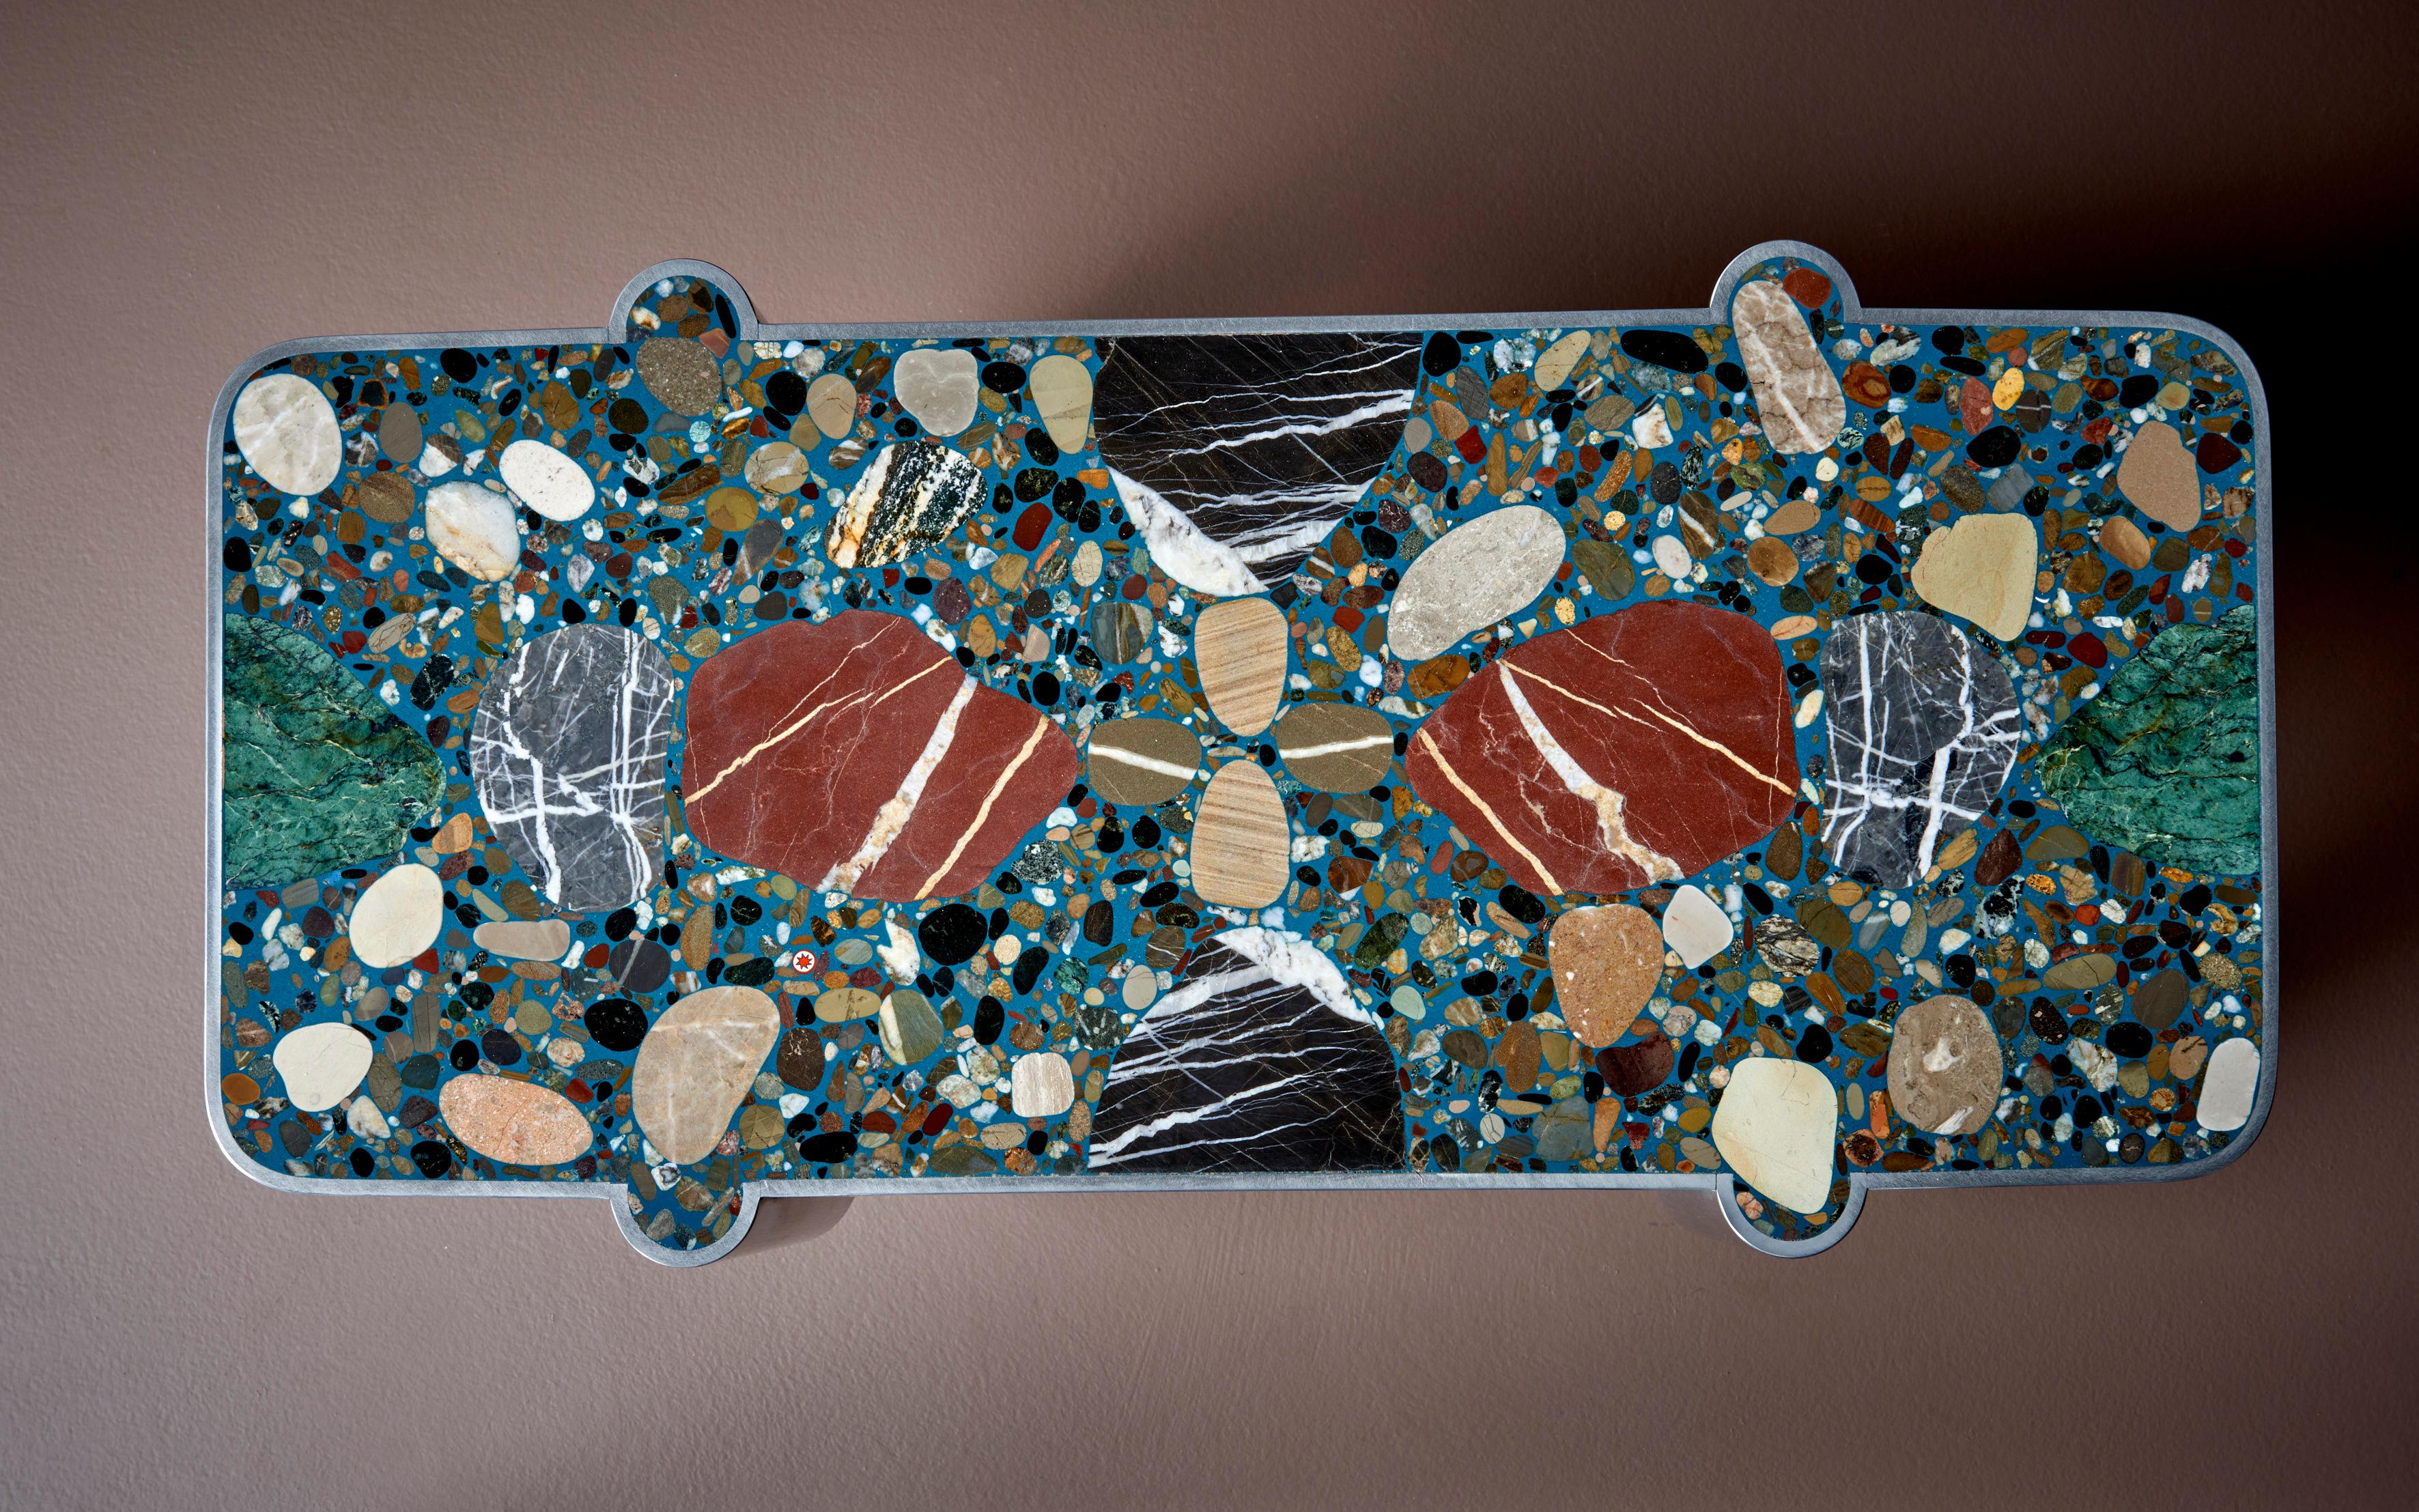 Hand-Crafted Handcrafted Terrazzo Coffee Table 